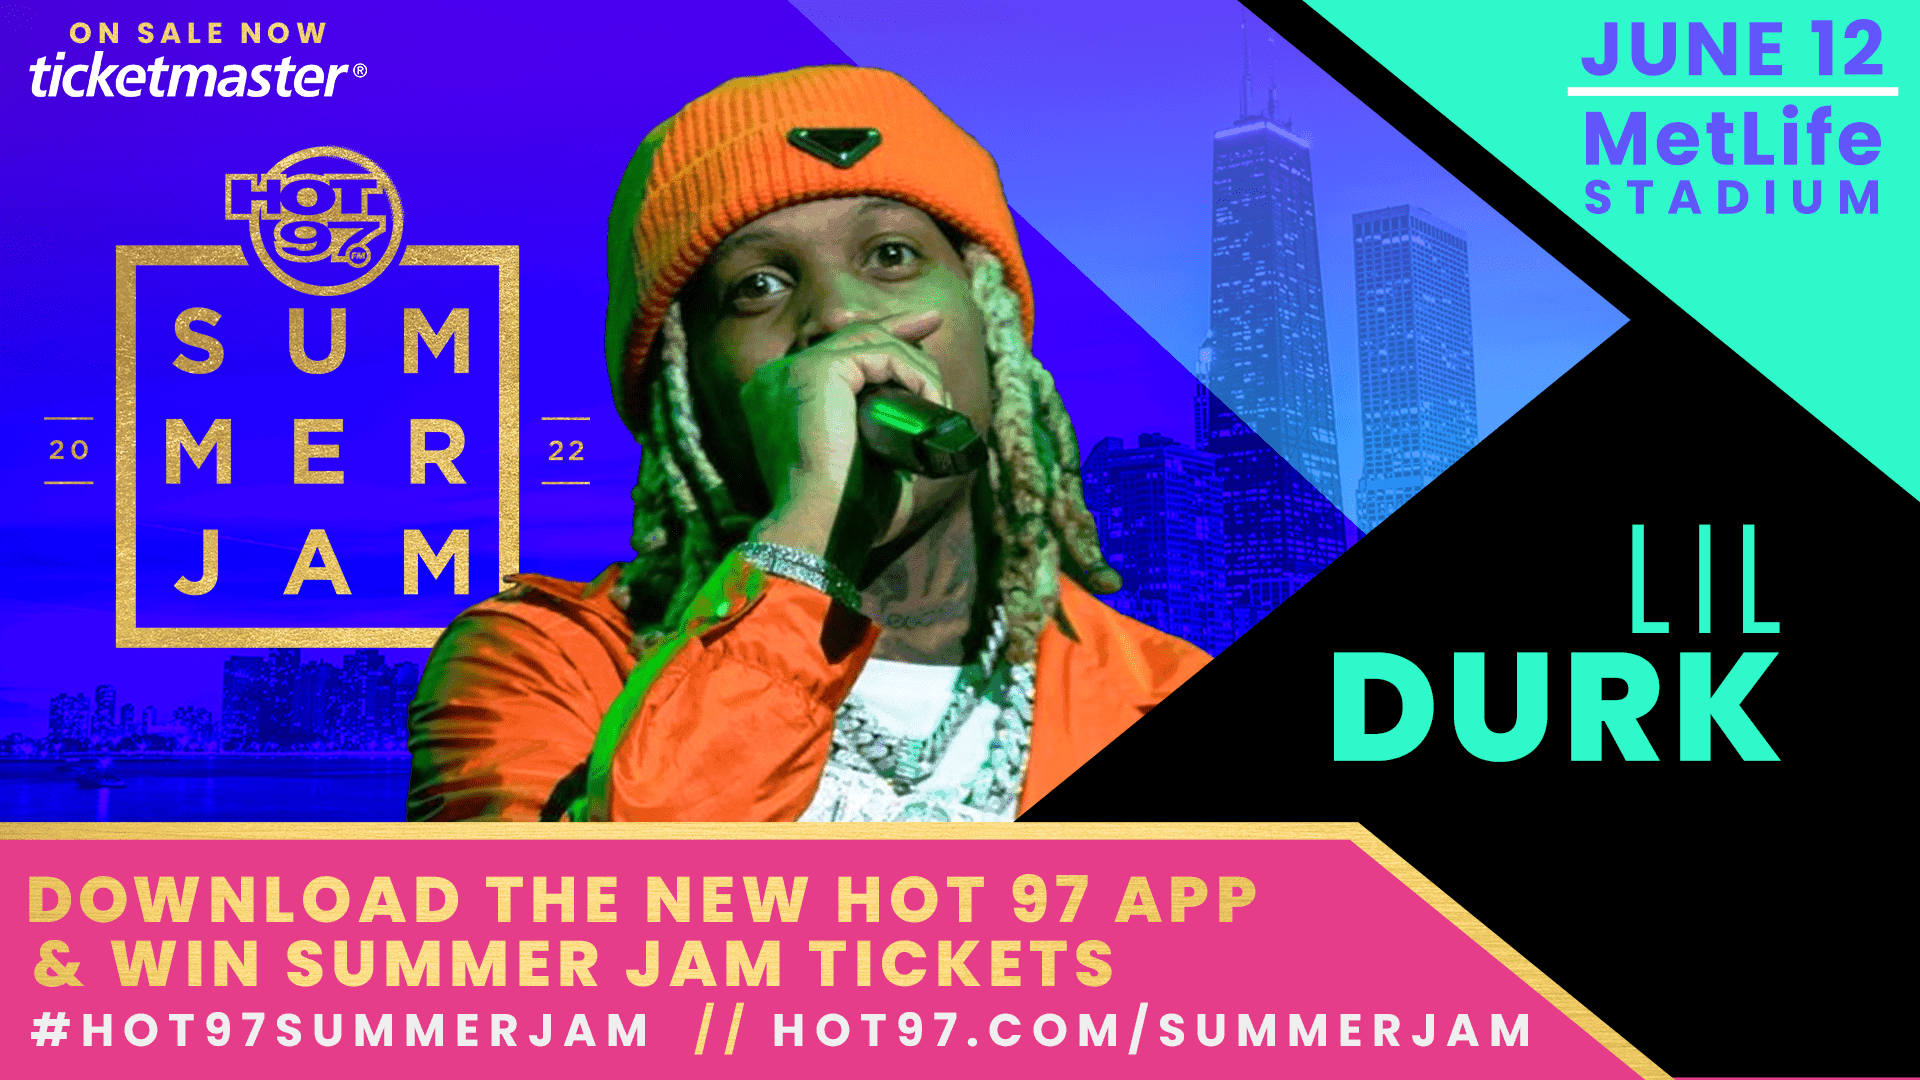 Lil Durk Is Taking The Summer Jam Stage!